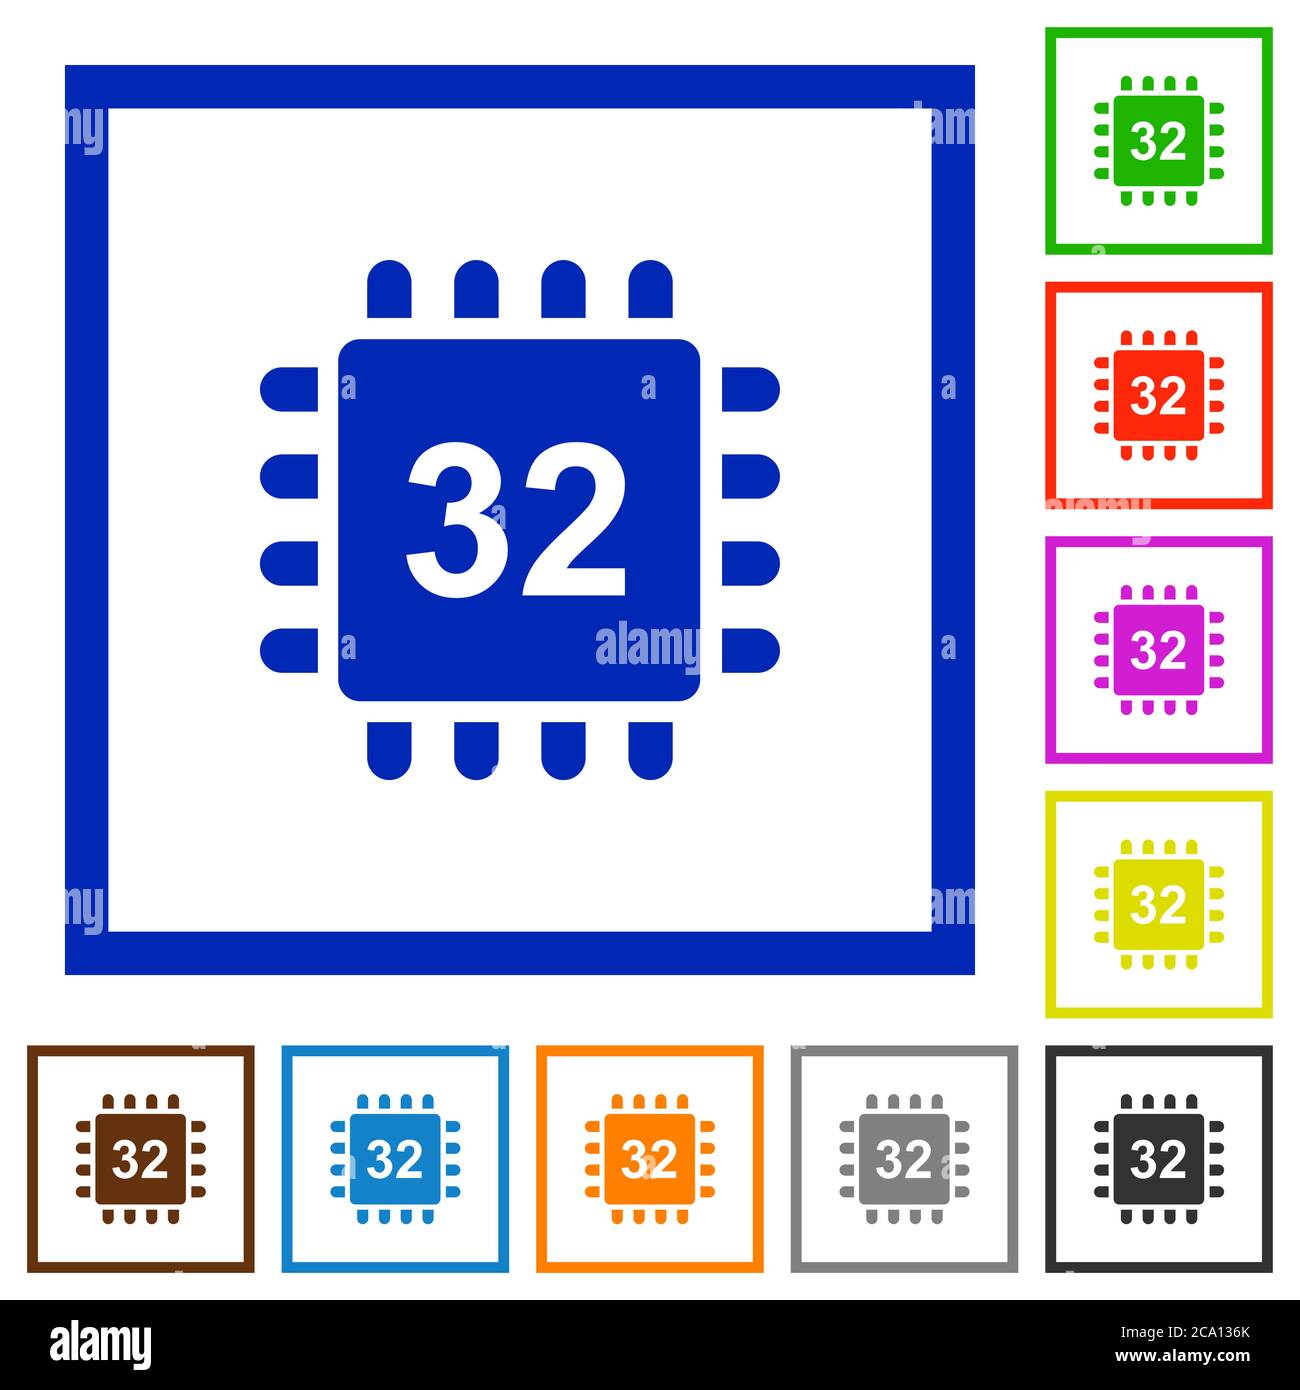 Microprocessor 32 bit architecture flat color icons in square frames on white background Stock Vector